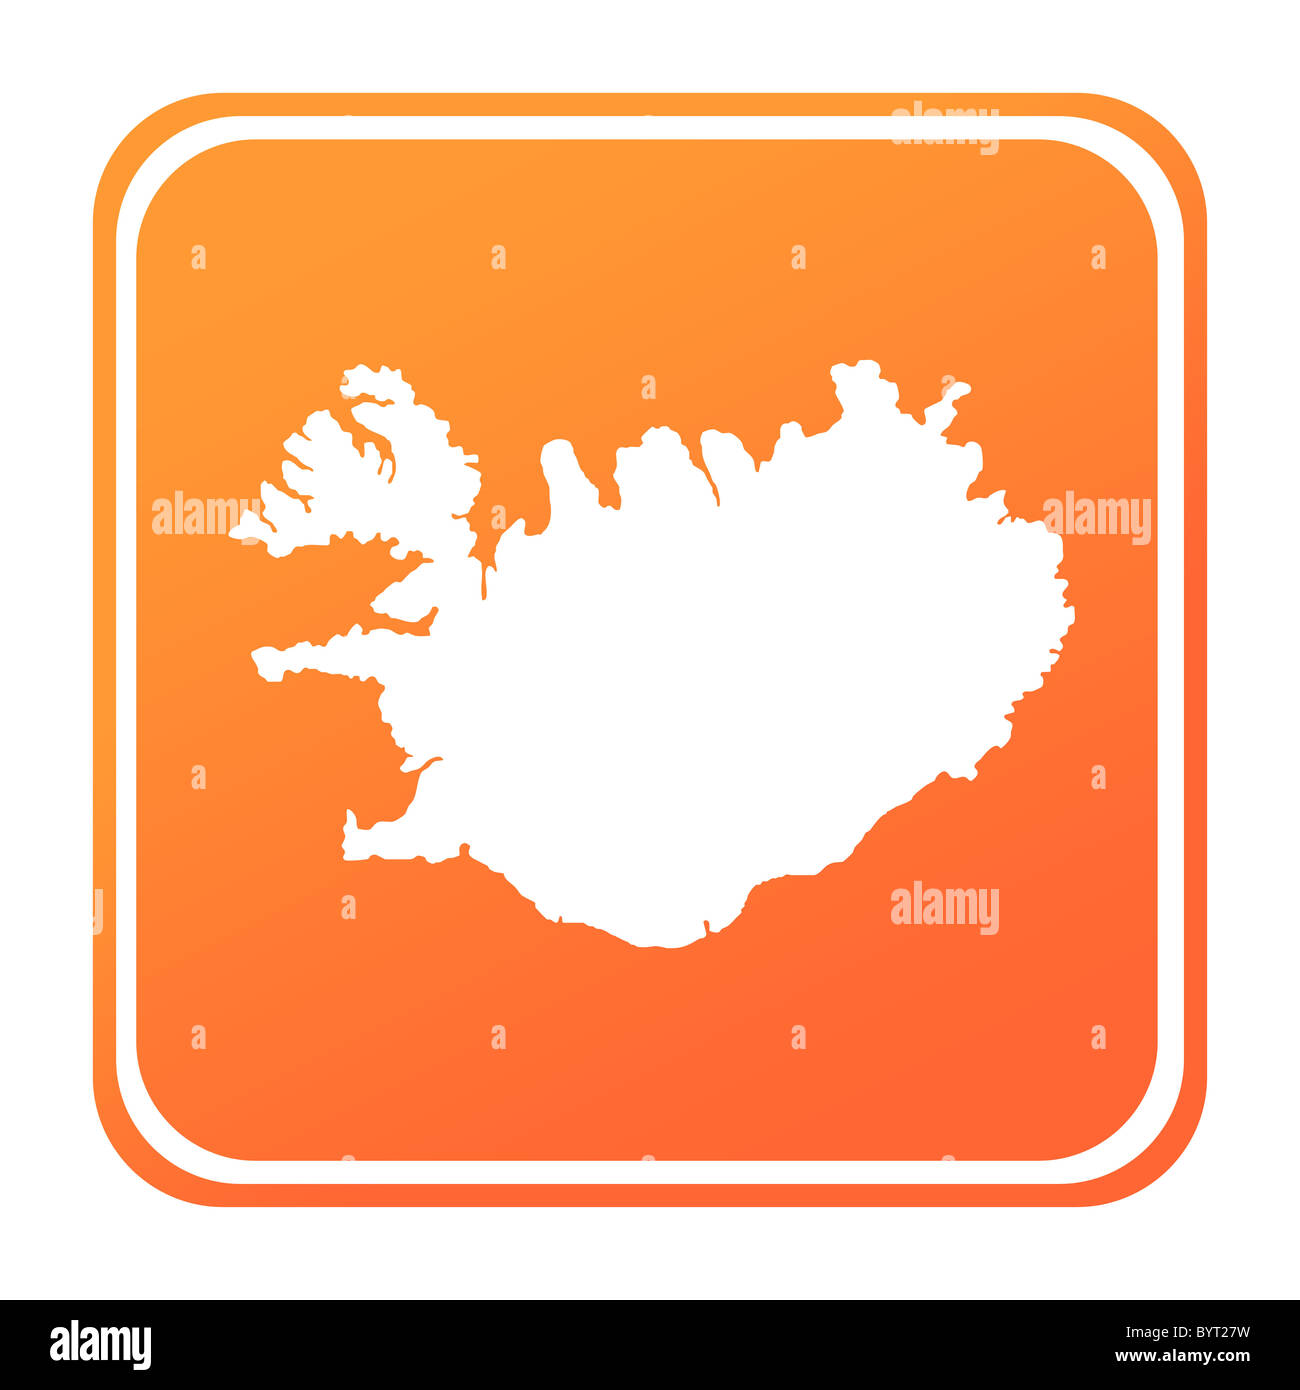 Illustration of Iceland map button; isolated on white background. Stock Photo